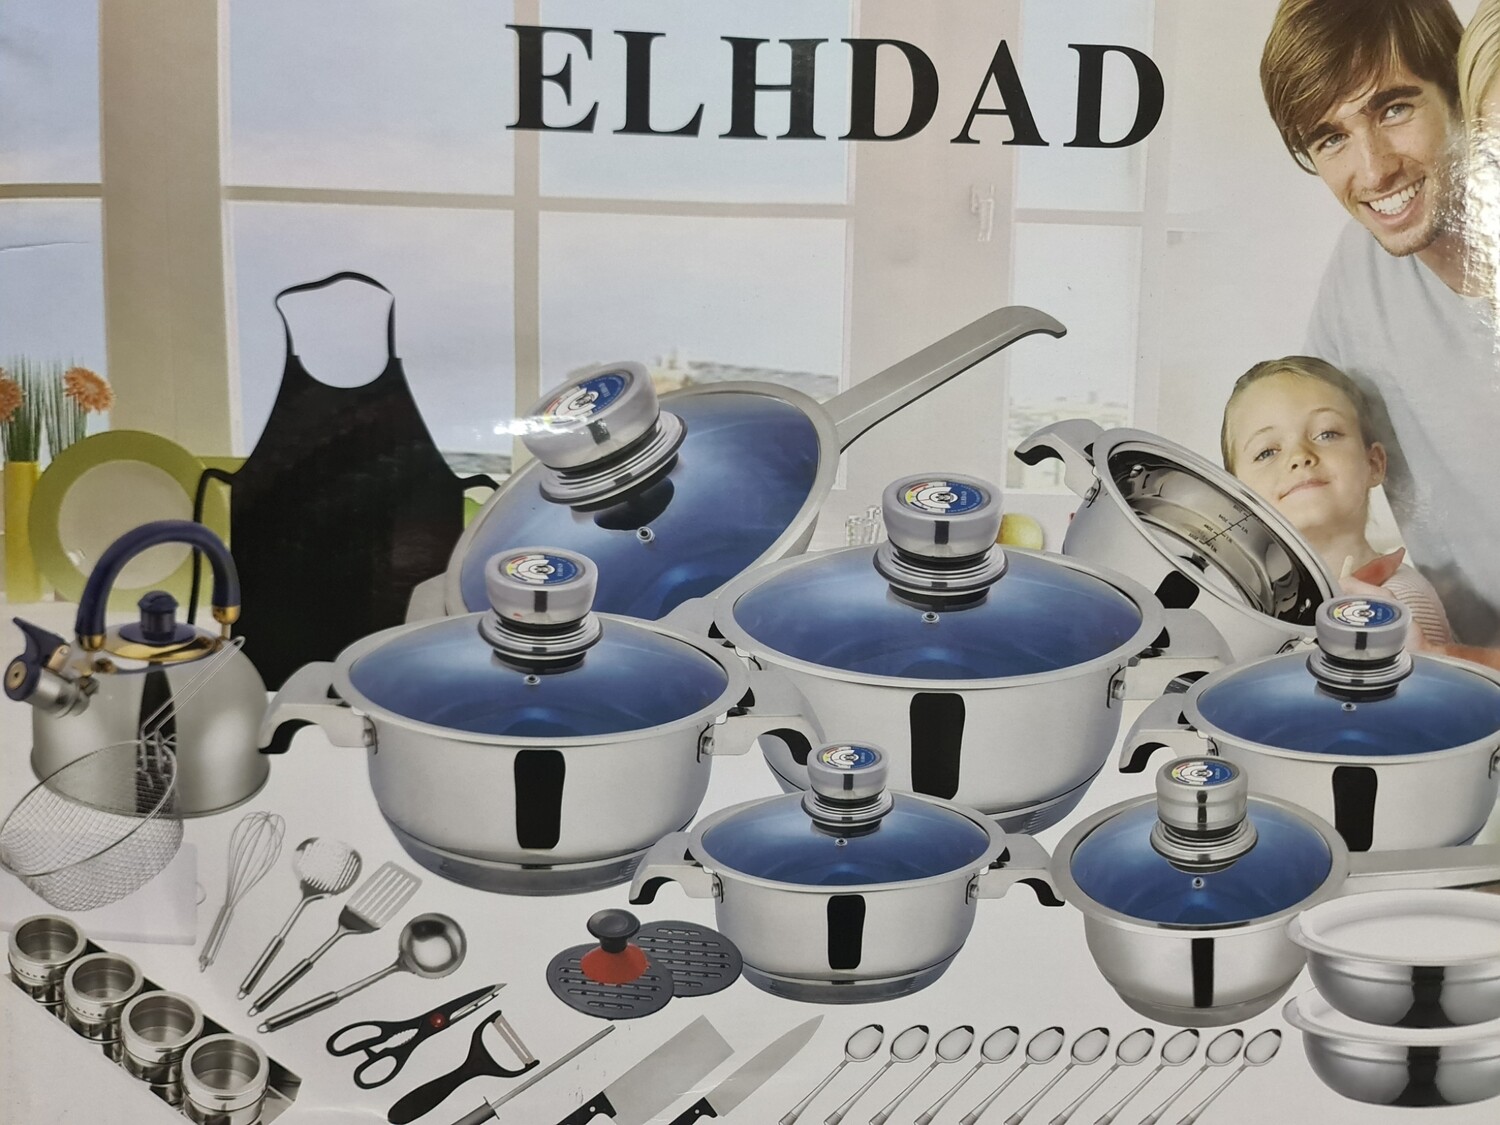 Elhdad 50pcs stainless steel cookware set. With Swiss quality control. Complete cooking solution